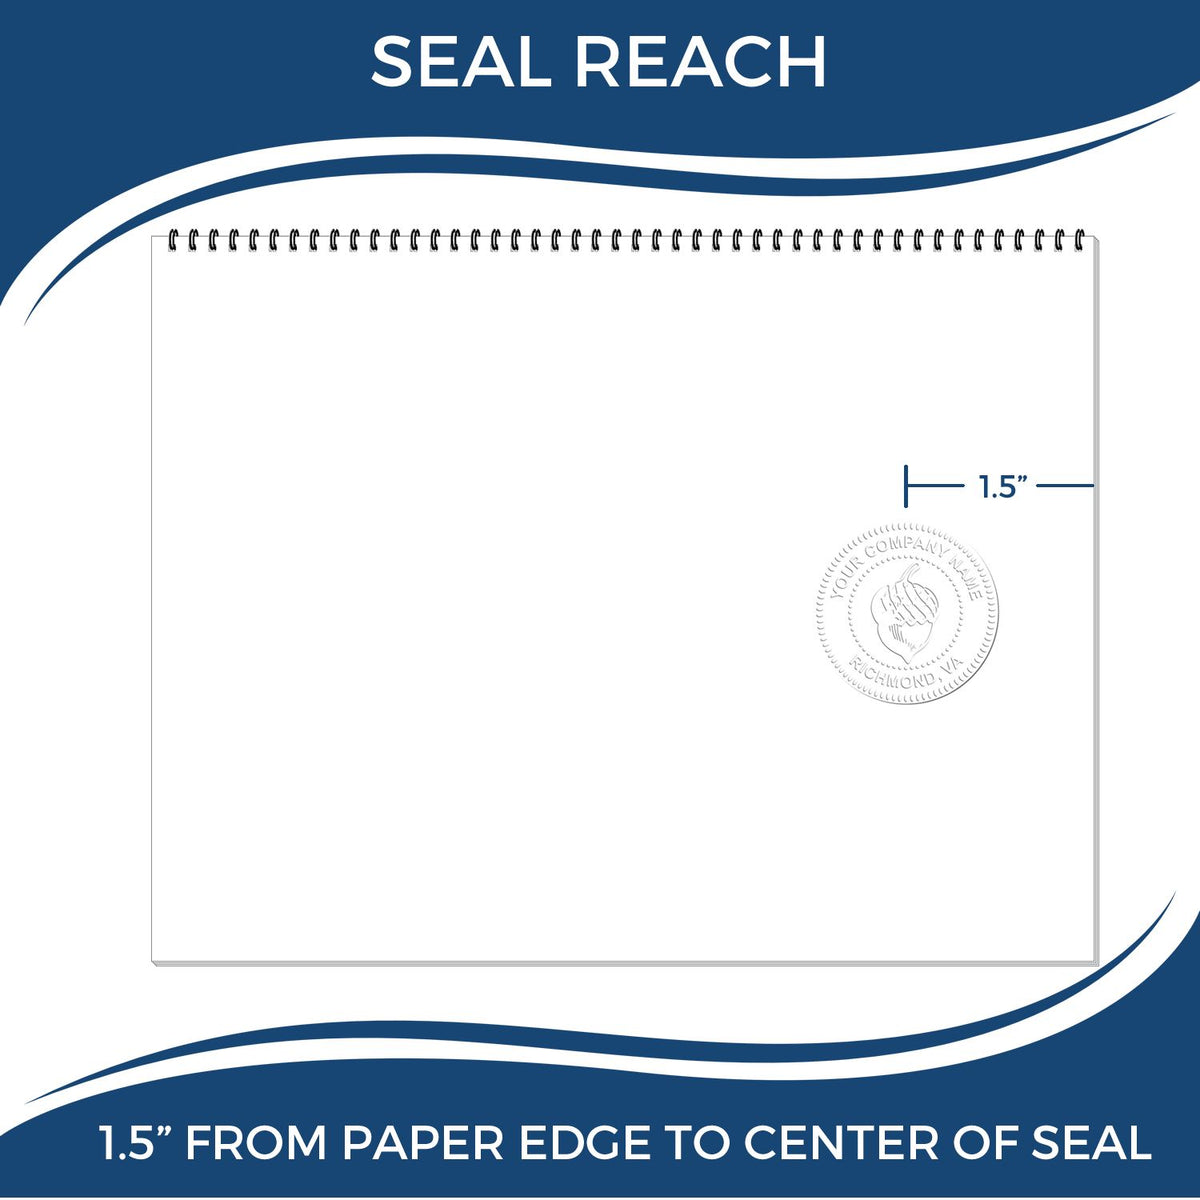 An infographic showing the seal reach which is represented by a ruler and a miniature seal image of the Gift Vermont Land Surveyor Seal